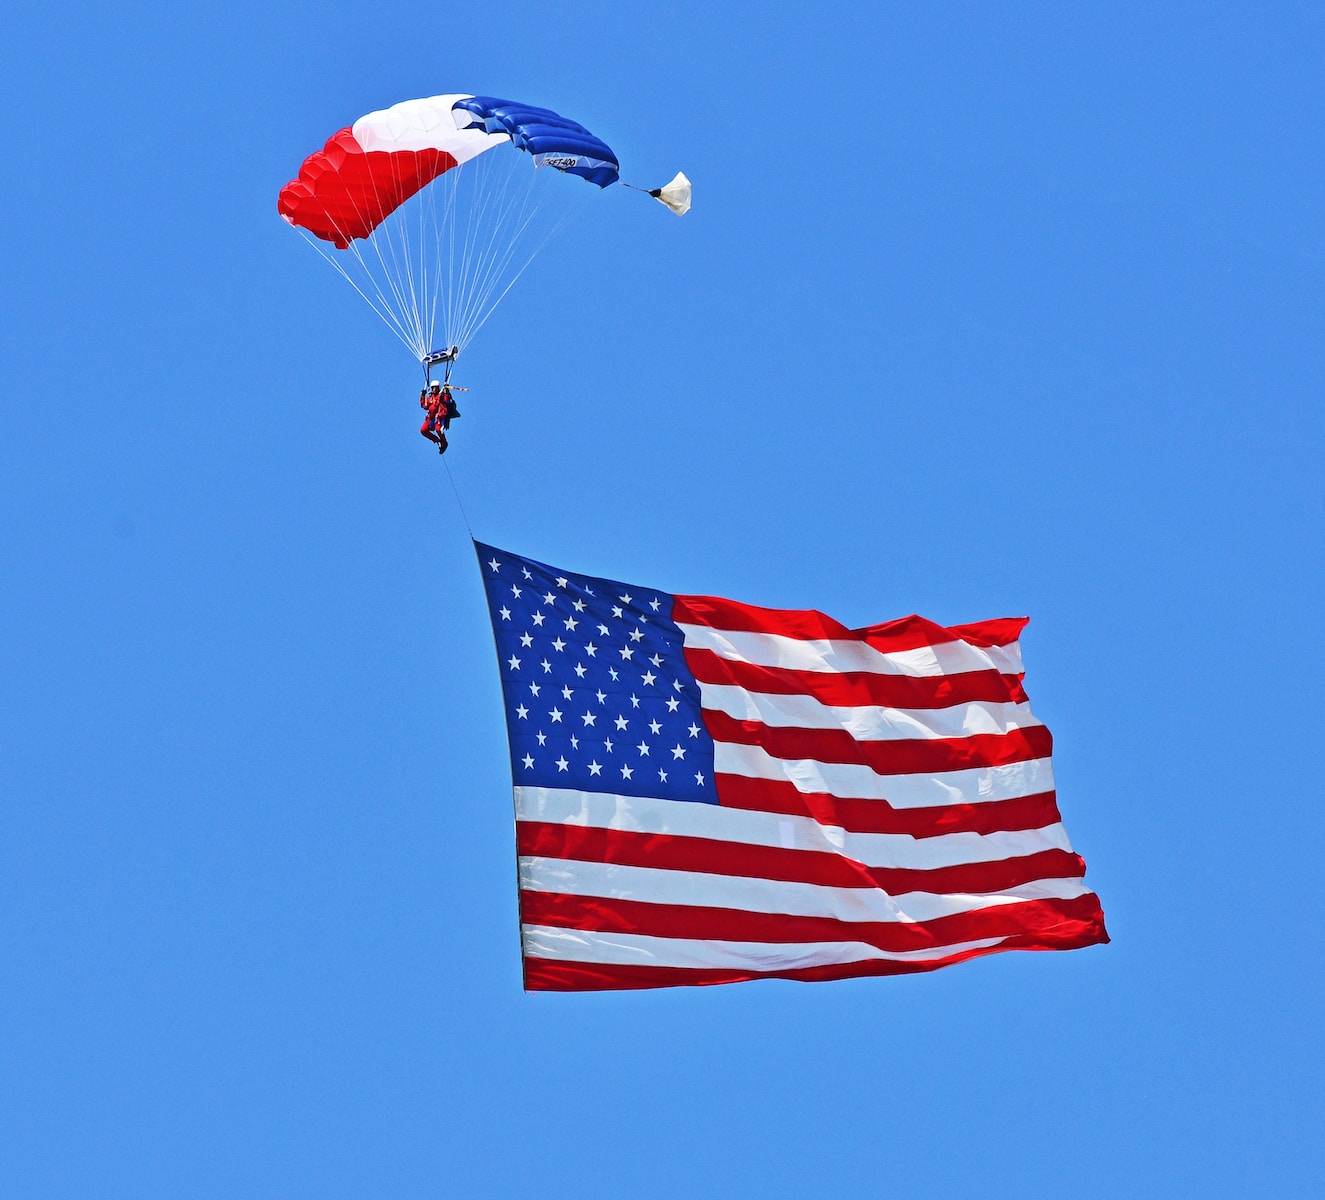 person paragliding with USA flag under blue sky